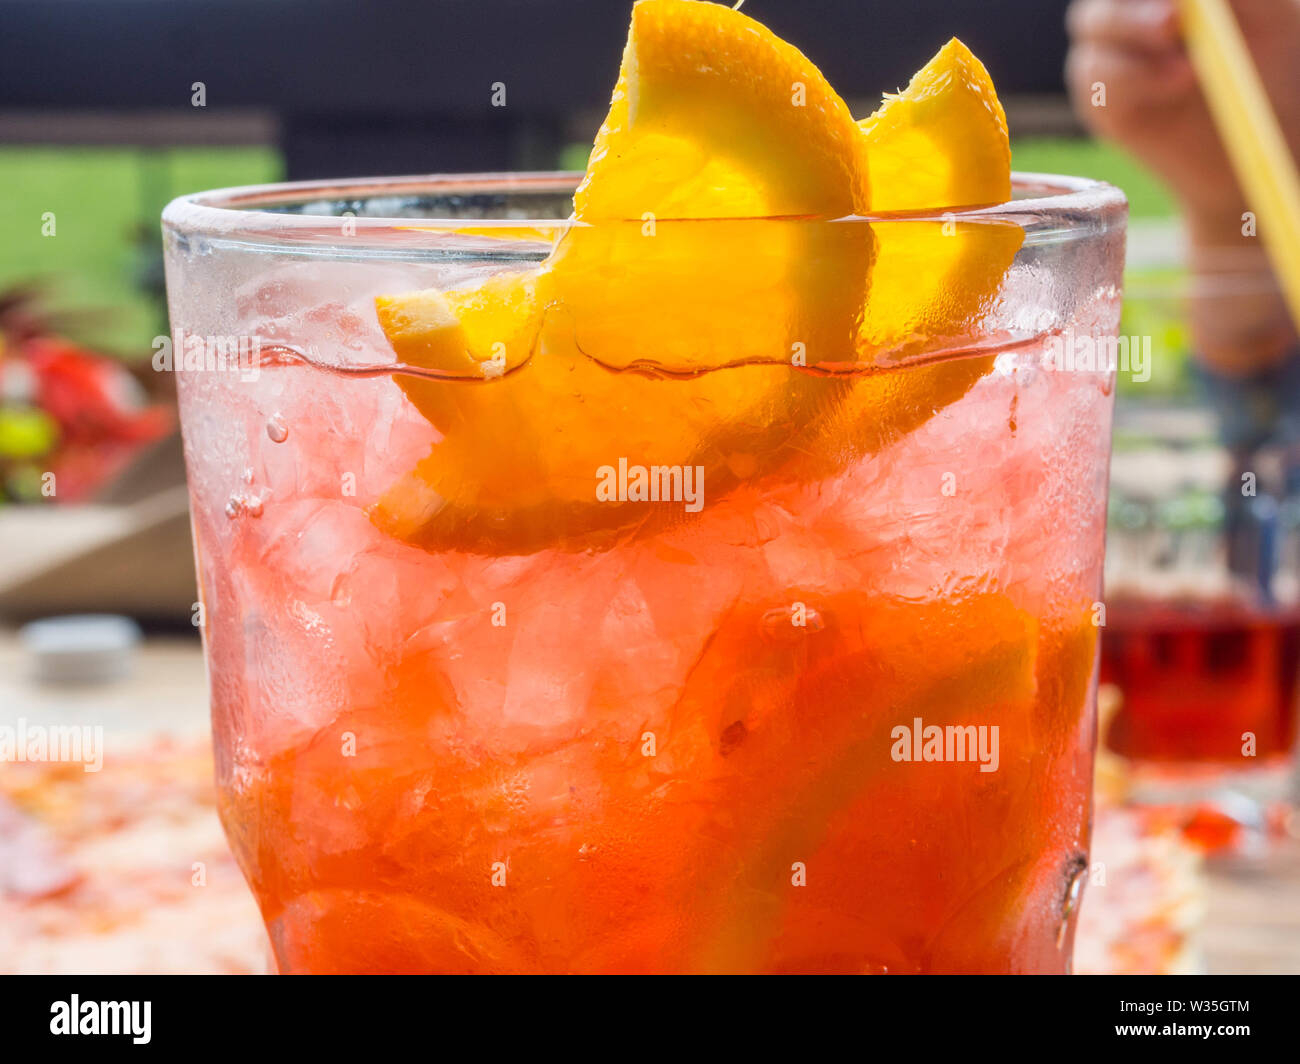 Red coctail with lemon and orange slices, and ice cubes, chilling time in bar Stock Photo